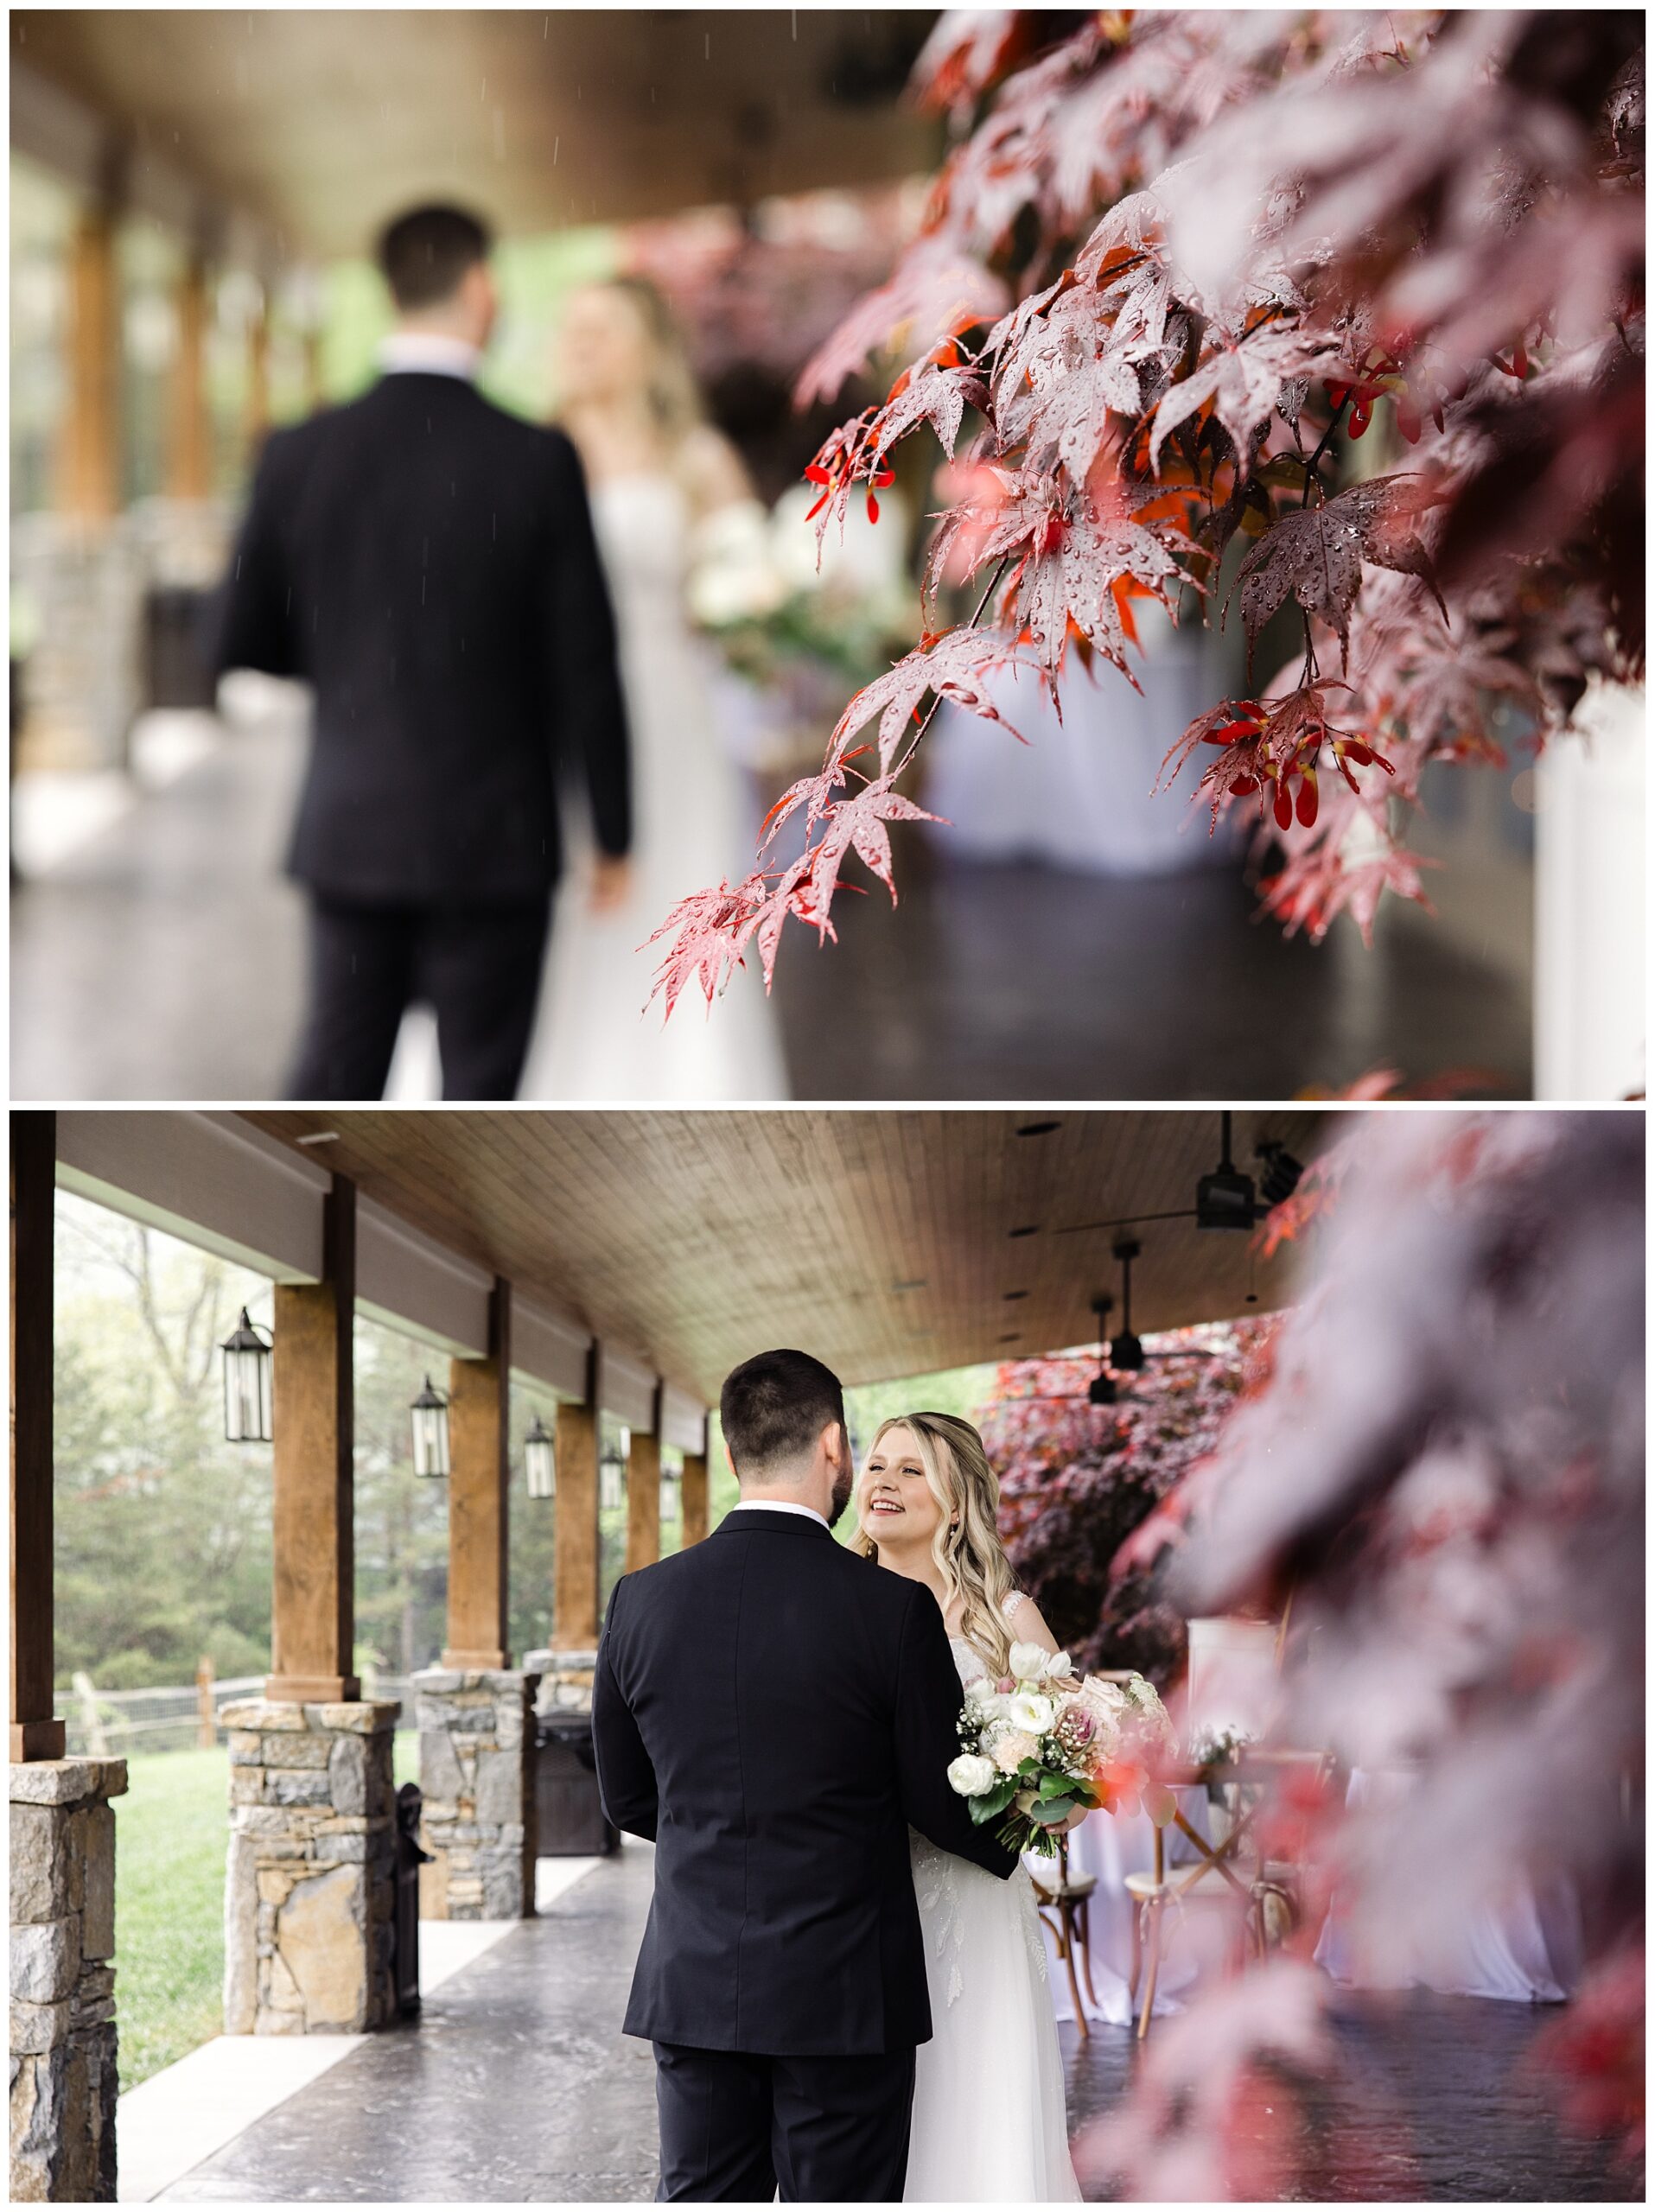 A bride and groom walking hand in hand under a covered patio at Chestnut Ridge, with the focus on leaves in the foreground in the top image, and the couple facing each other in the bottom image.